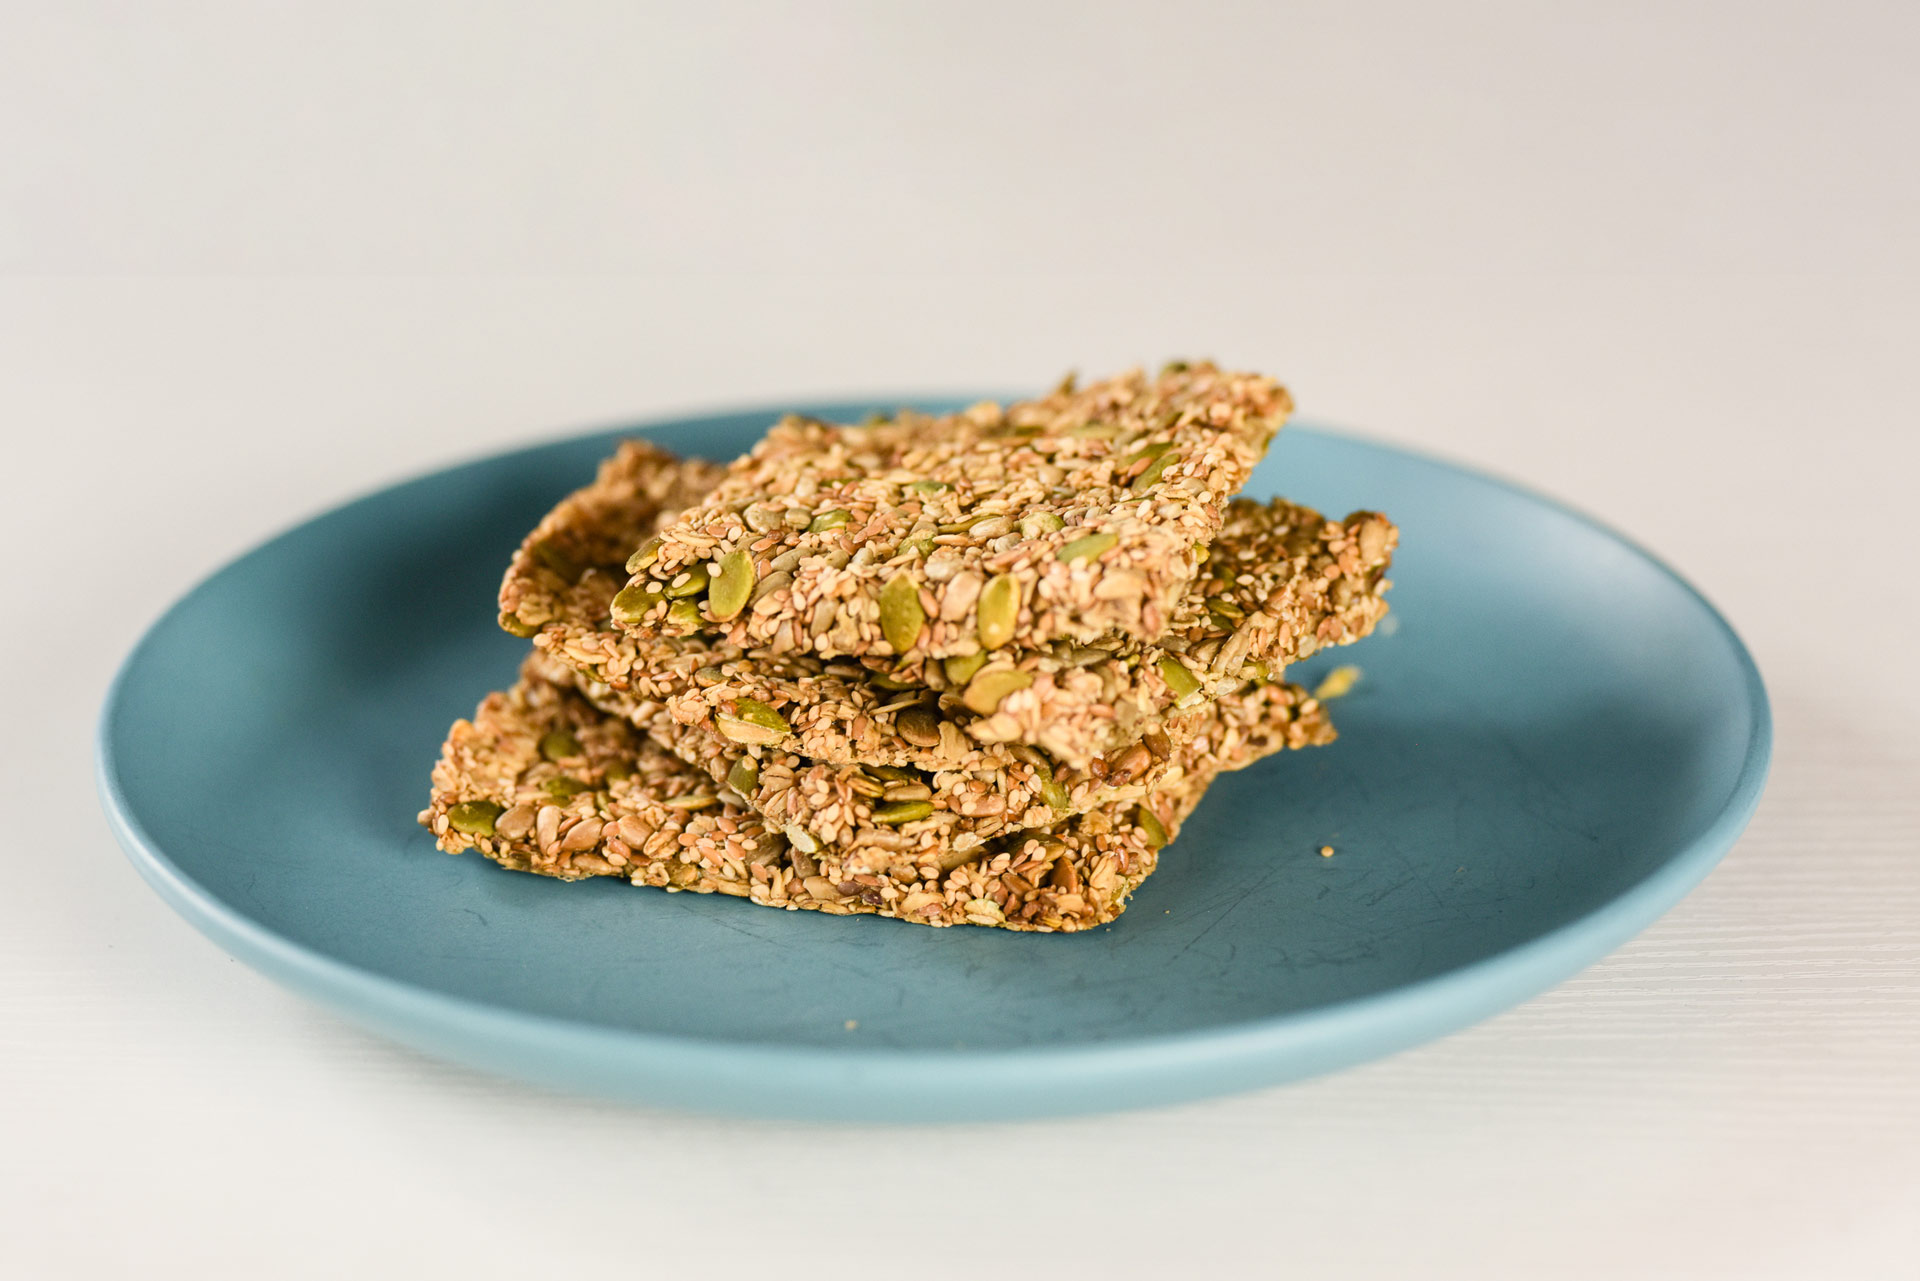 Featured image for “Seed crisp bread recipe with healthy fats”